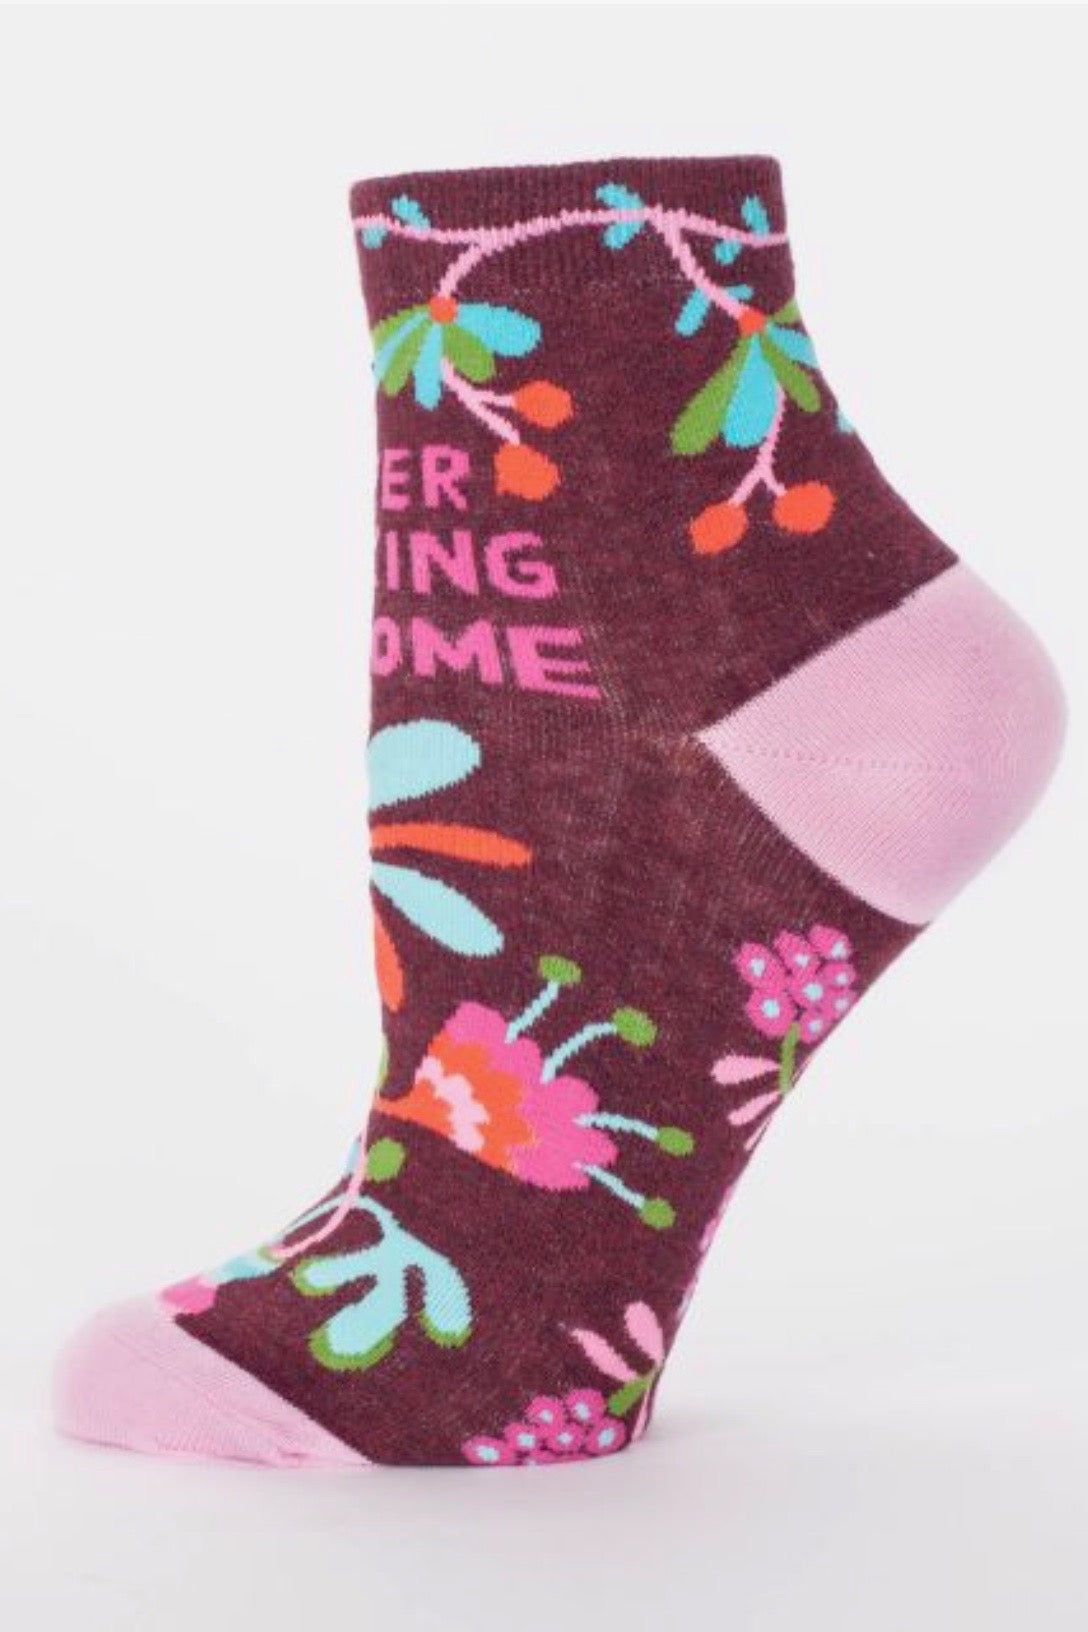 blue-q-SW631-womens-ankle-socks-super-fucking-awesome-pink